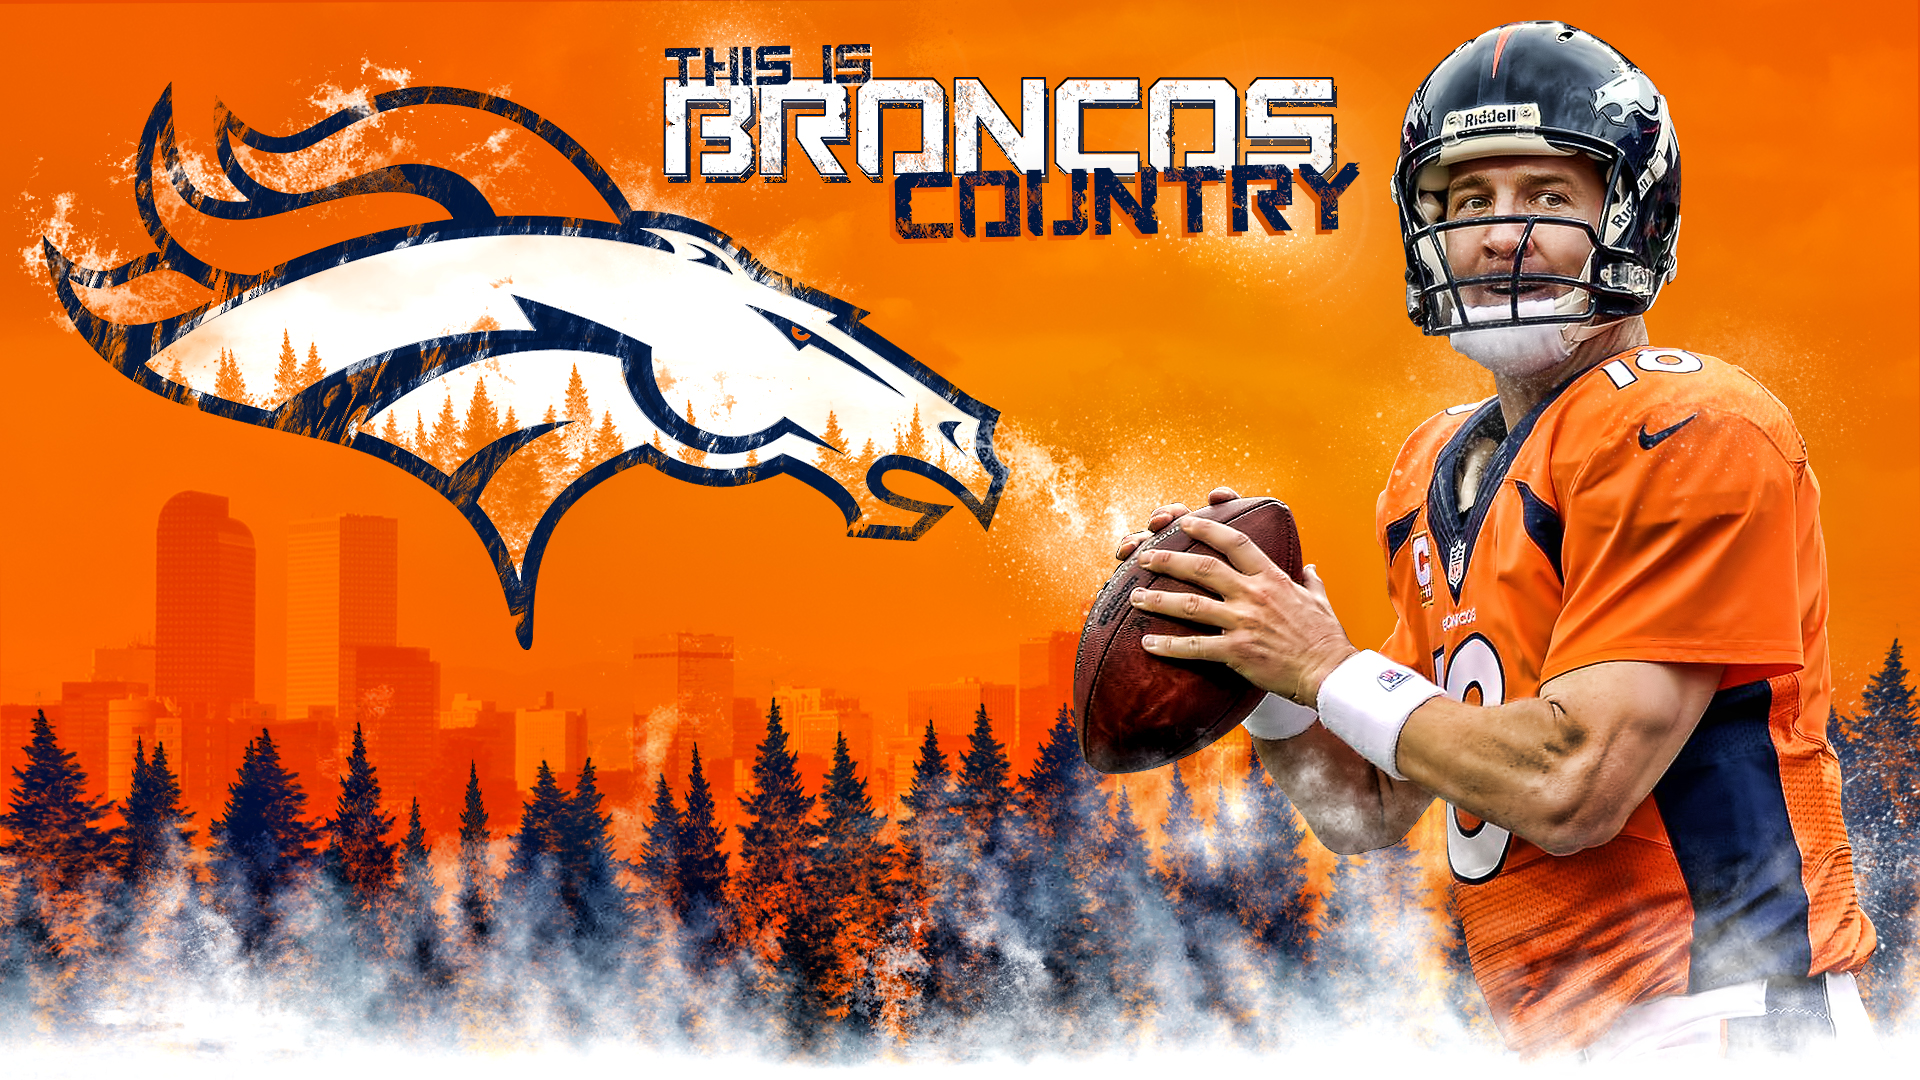 Denver Broncos Peyton Manning Broncos Country Wall by 1920x1080